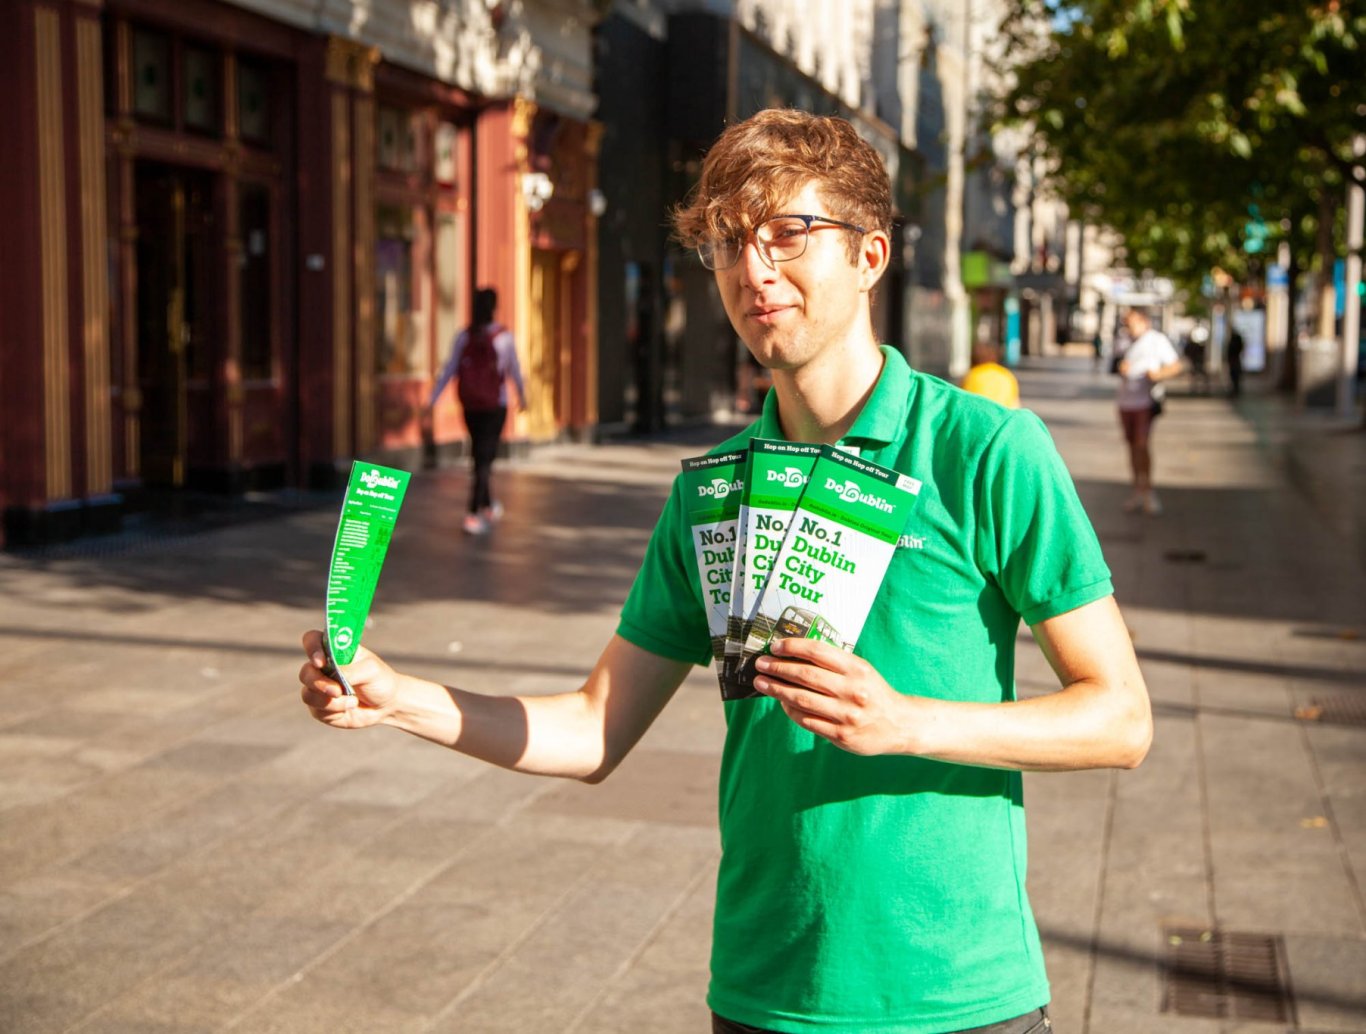 man with glasses standing on street with brochures in hand 